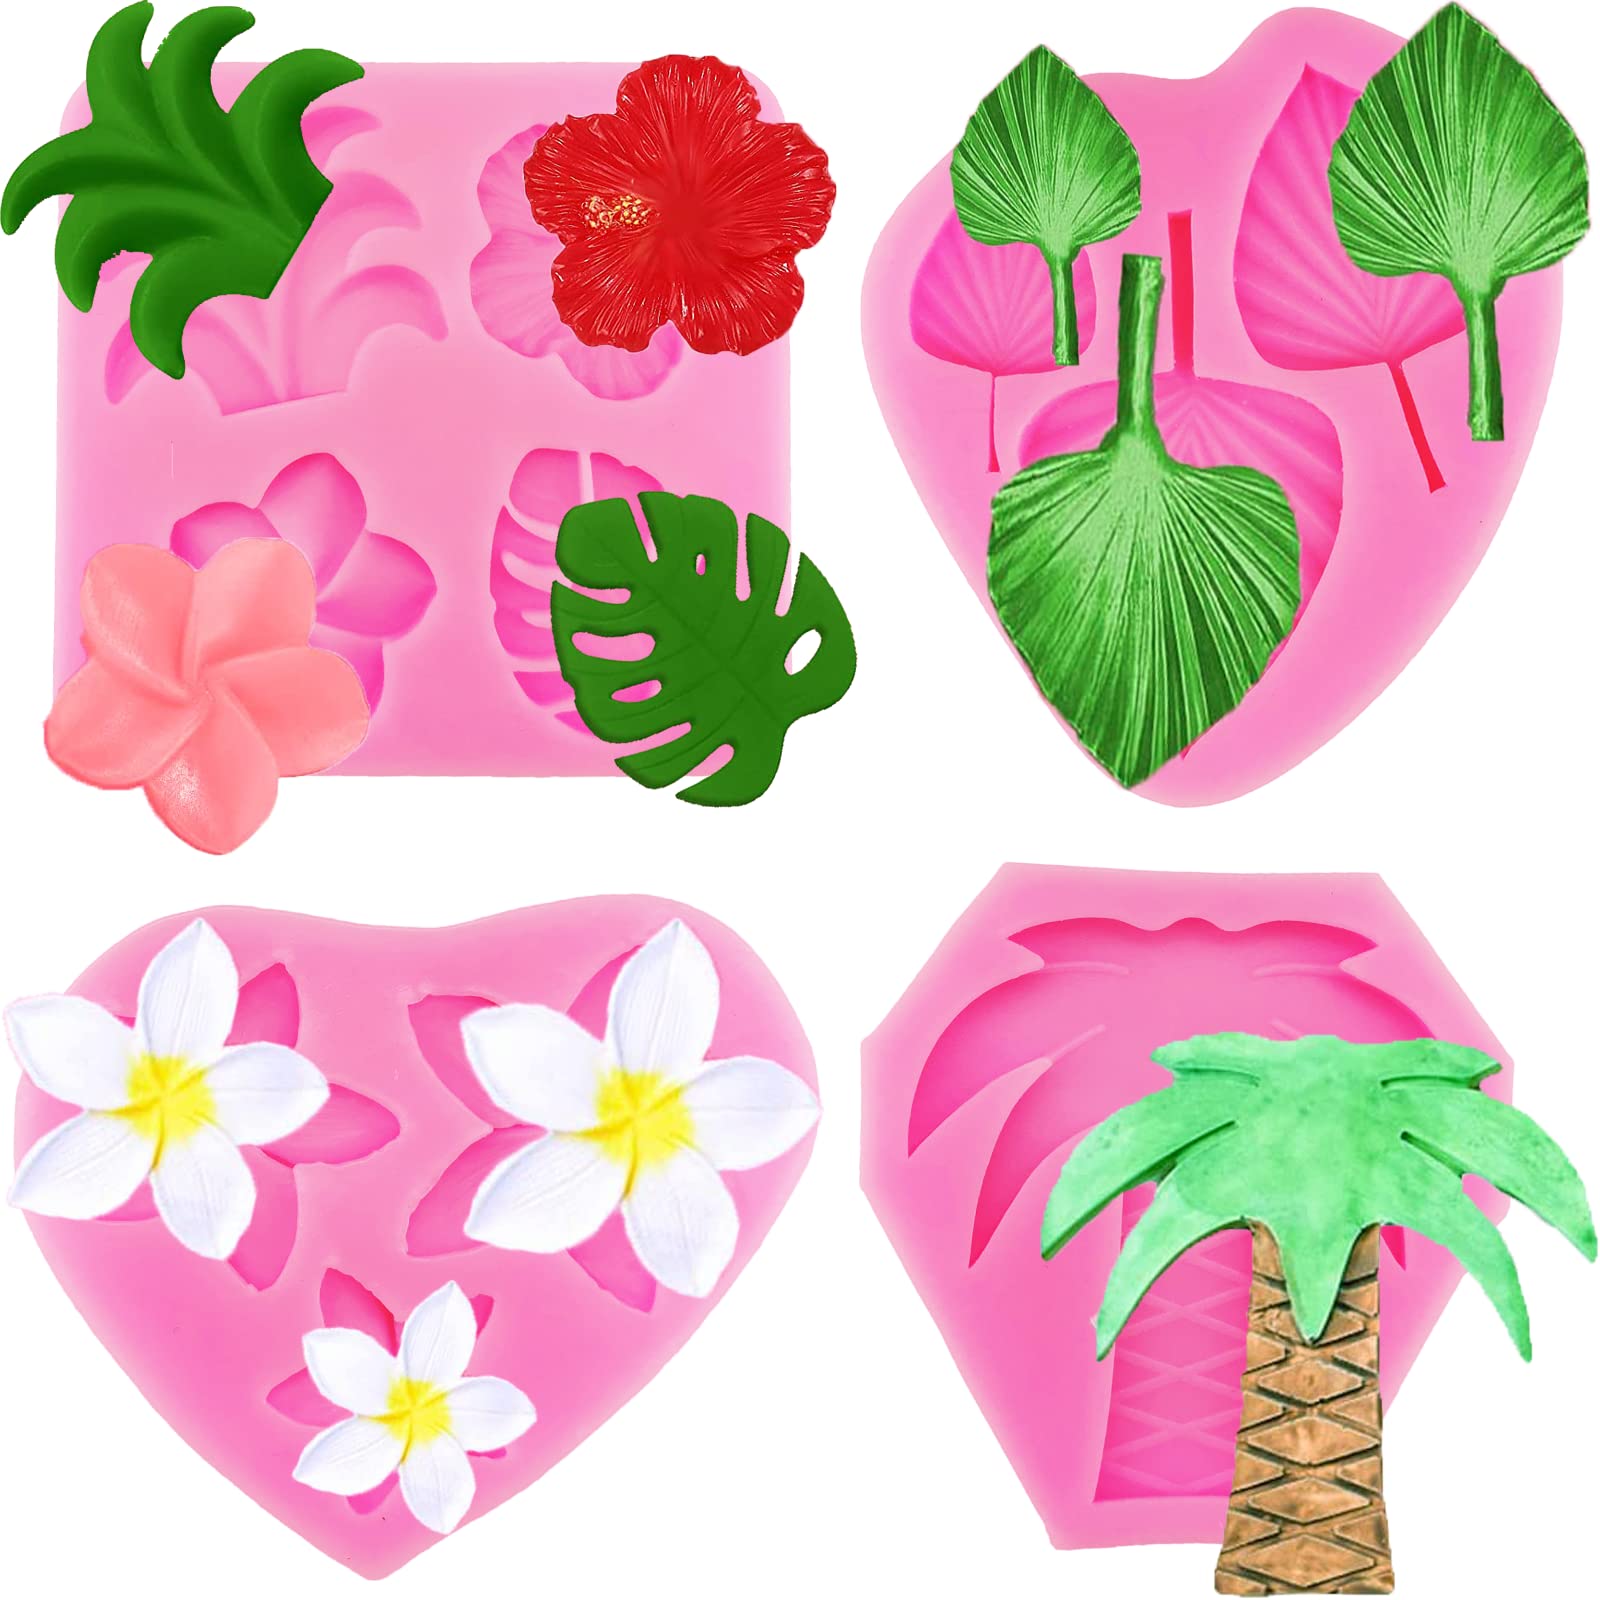 4 Pcs Tropical Flowers Leaves Mold Fan Leaf Fondant Mold Hibiscus Flower Monstera Leafage Palm Leaf Plumeria Flower Silicone Molds for DIY Chocolate Candy Cupcake Cake Topper Hawaiian Party Decoration